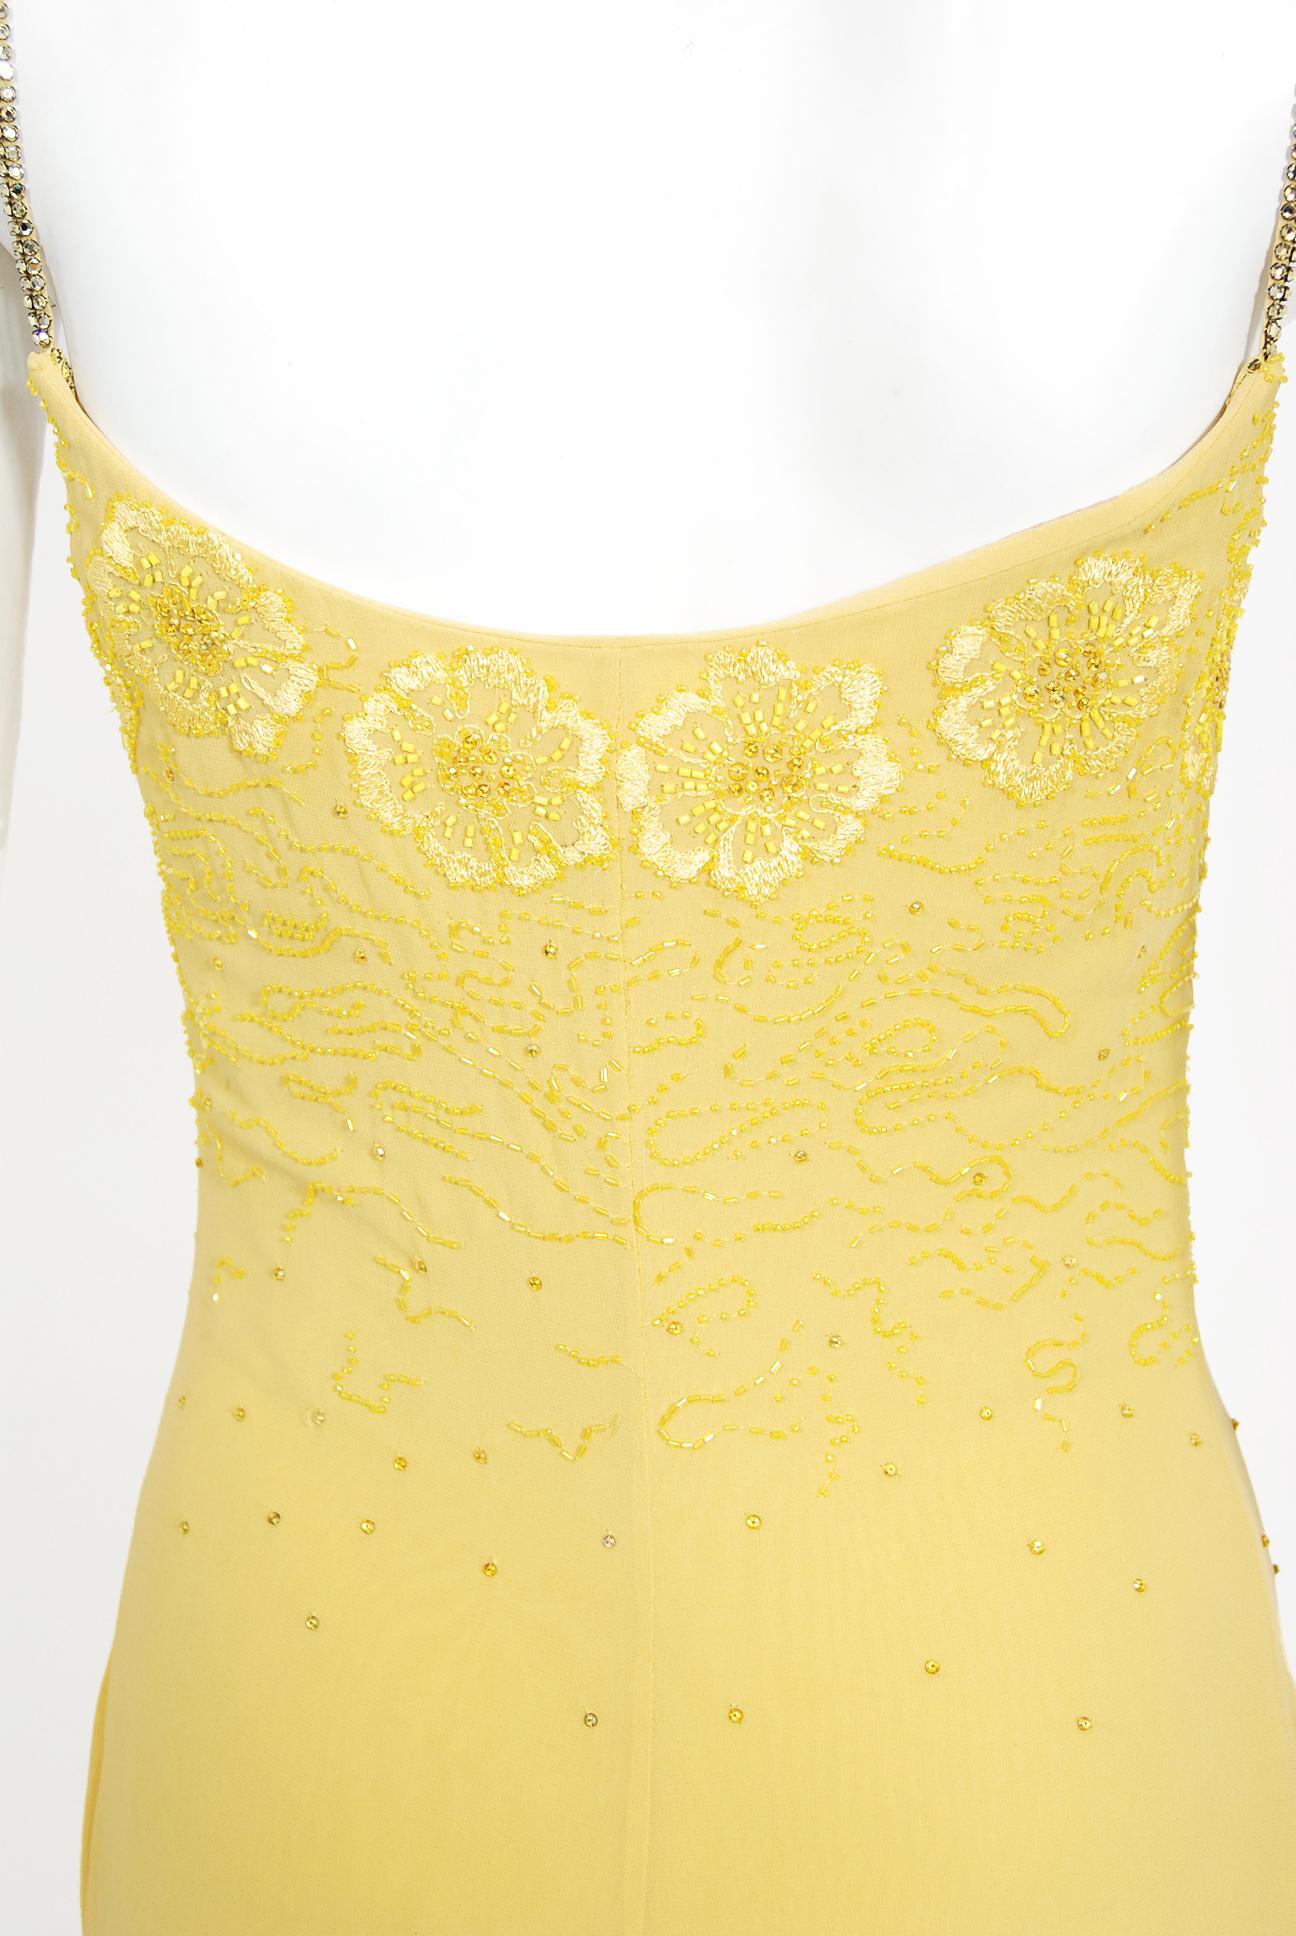 Vintage 1998 Versace Couture Beaded Yellow Silk Chiffon Hourglass Gown & Wrap 9